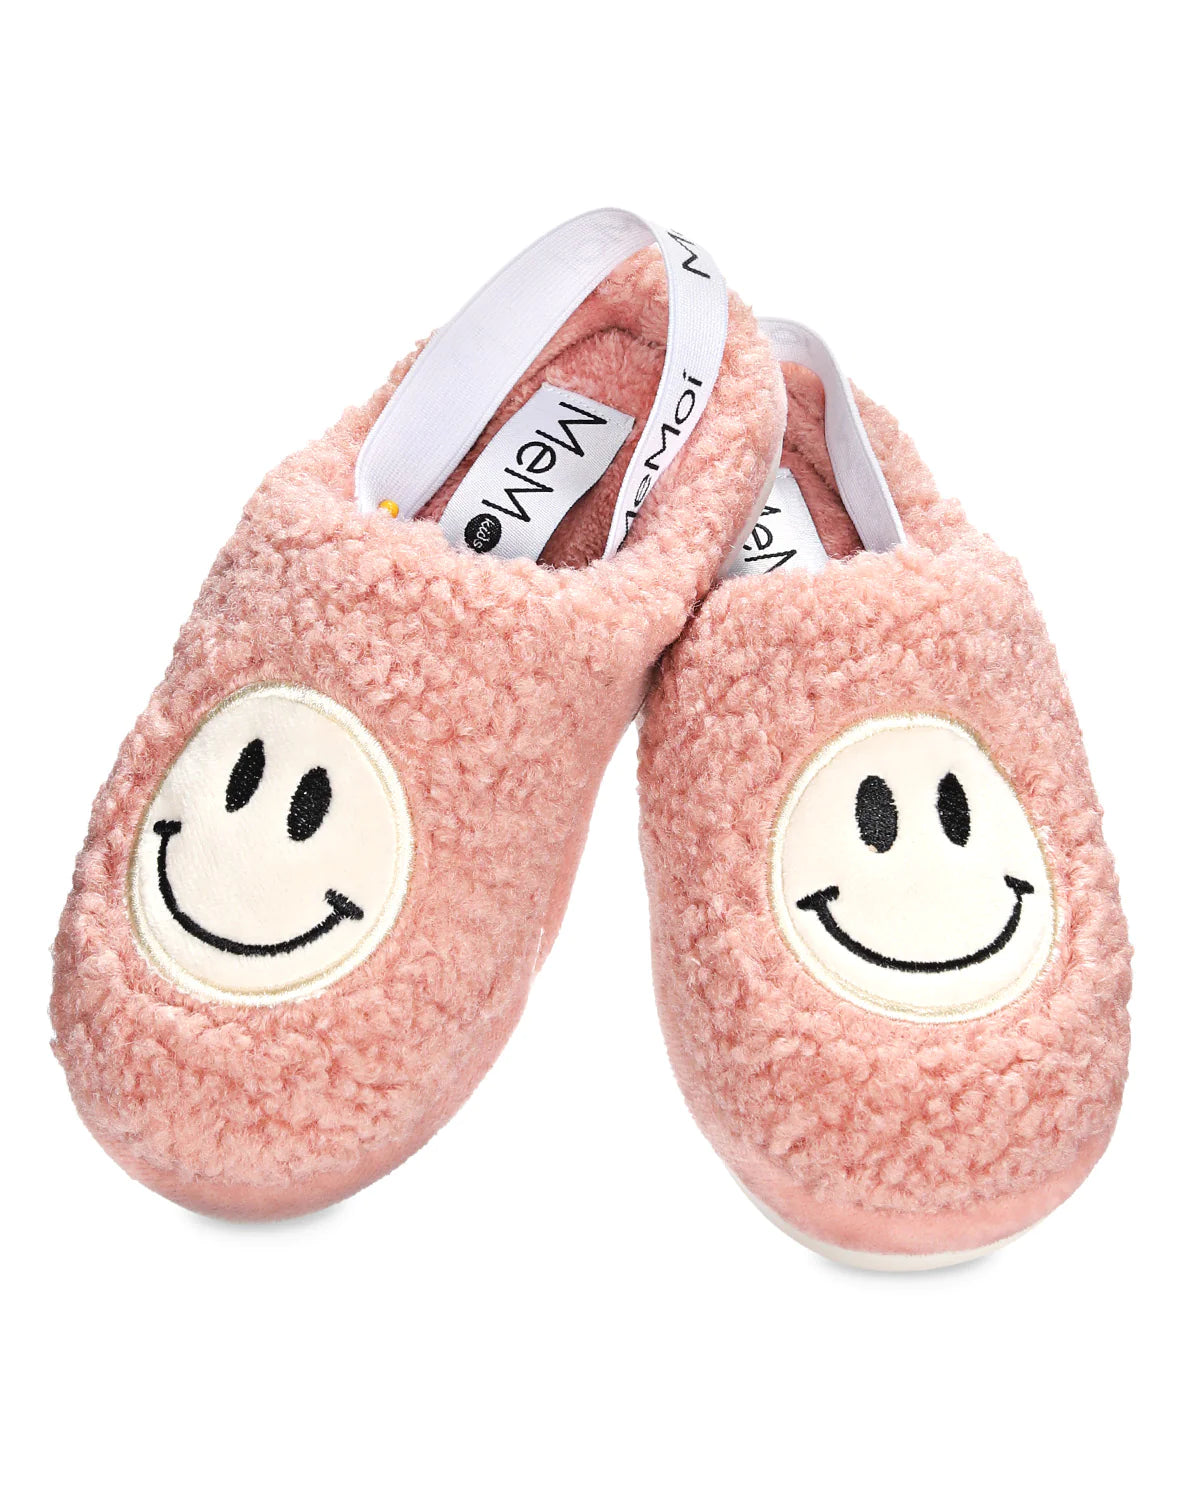 Kids Fuzzy Pink Smilely Plush Slippers